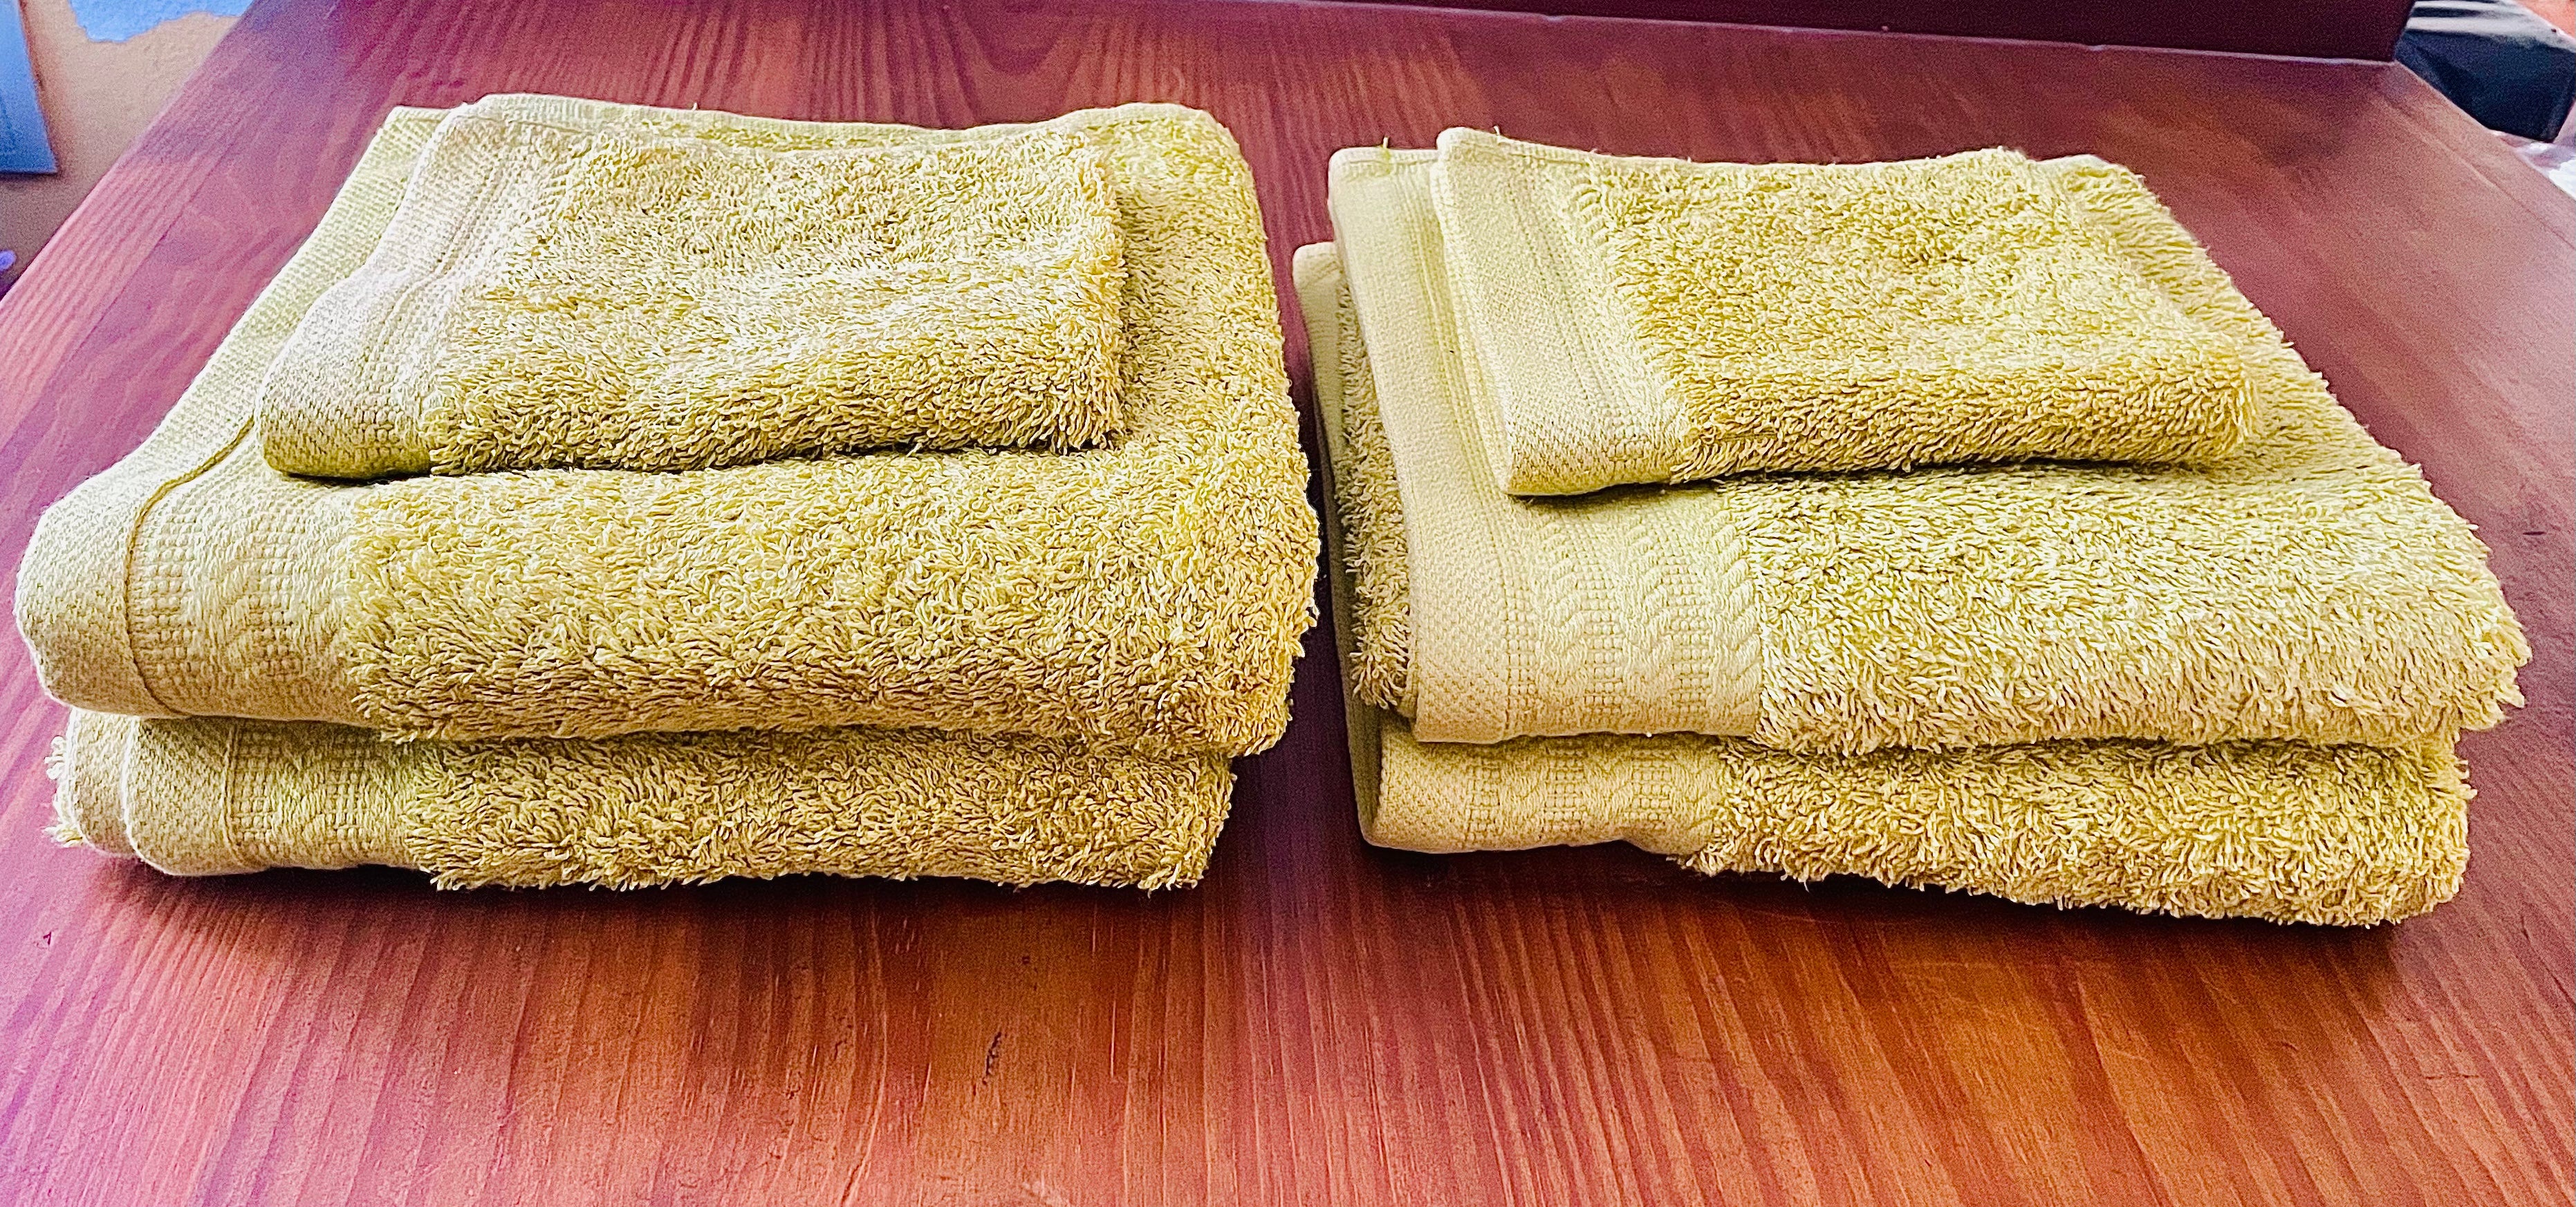 600g Cotton Towels, Mustard - 2 Face Cloths & 4 Hand Towels